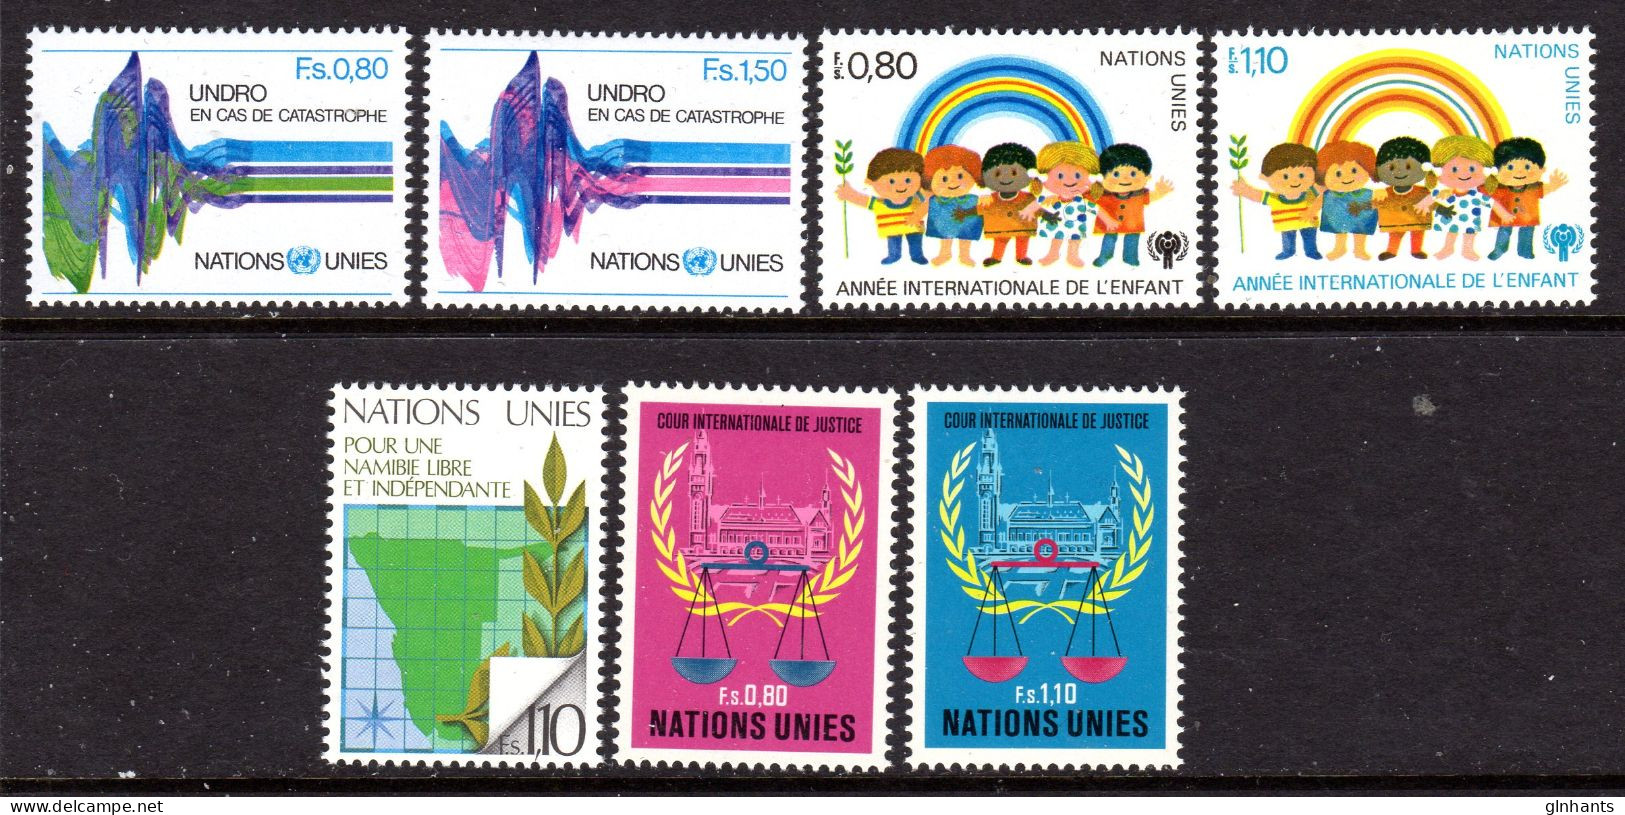 UNITED NATIONS UN GENEVA - 1979 COMPLETE YEAR SET (7V) AS PICTURED FINE MNH ** SG G82-G88 - Nuovi